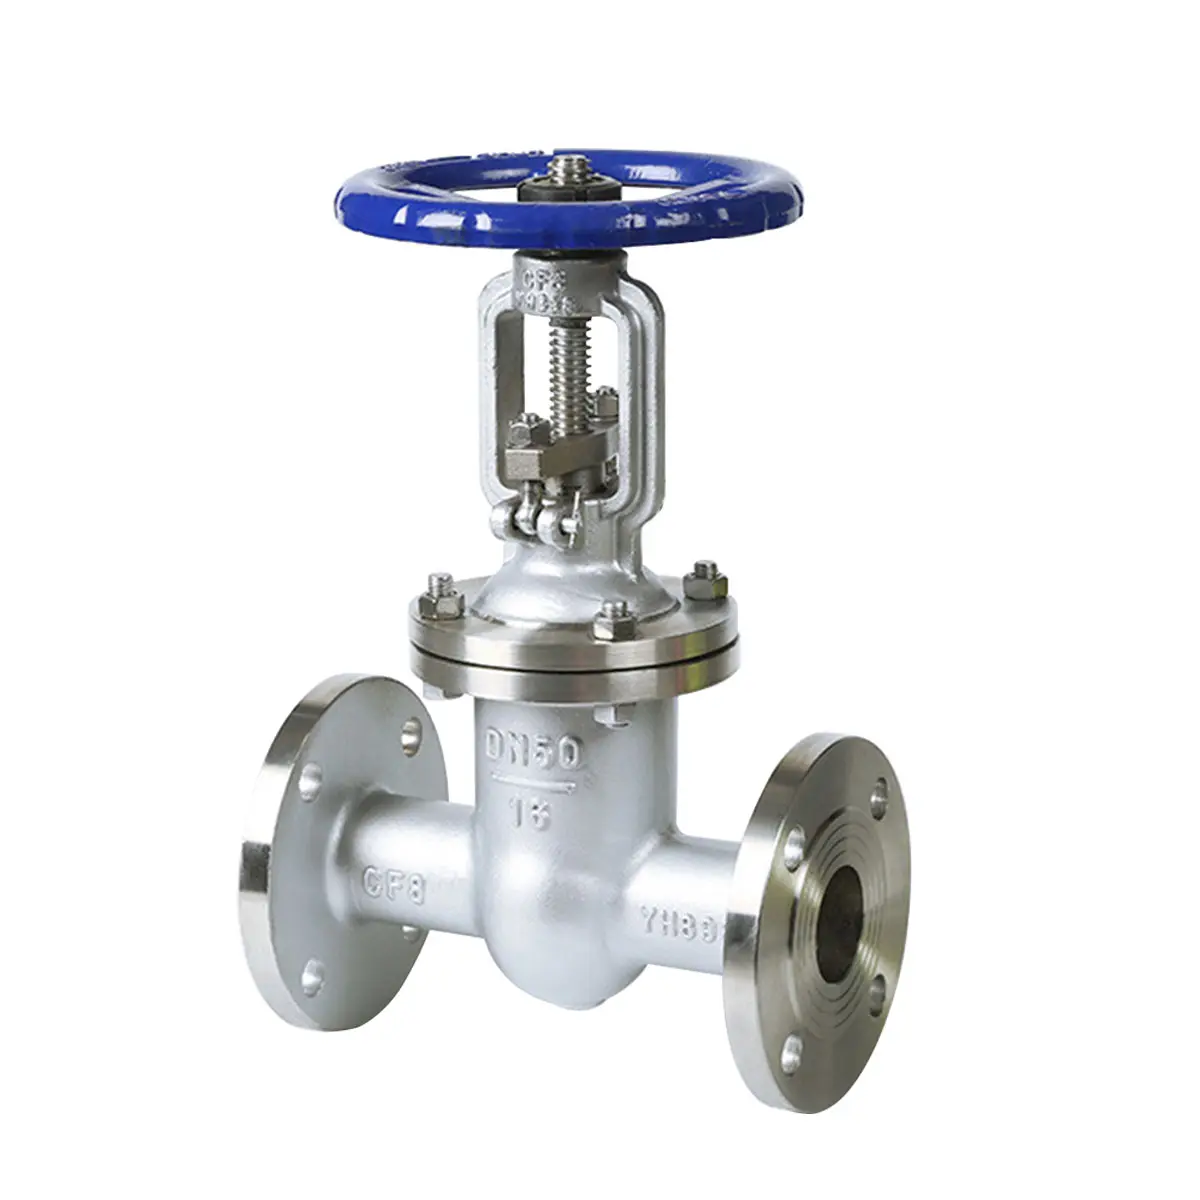 Manual Chemical Gate Valve 316 Stainless Steel Flange Z41W/H-16P/16R 304 Gate Valve for Industrial Use